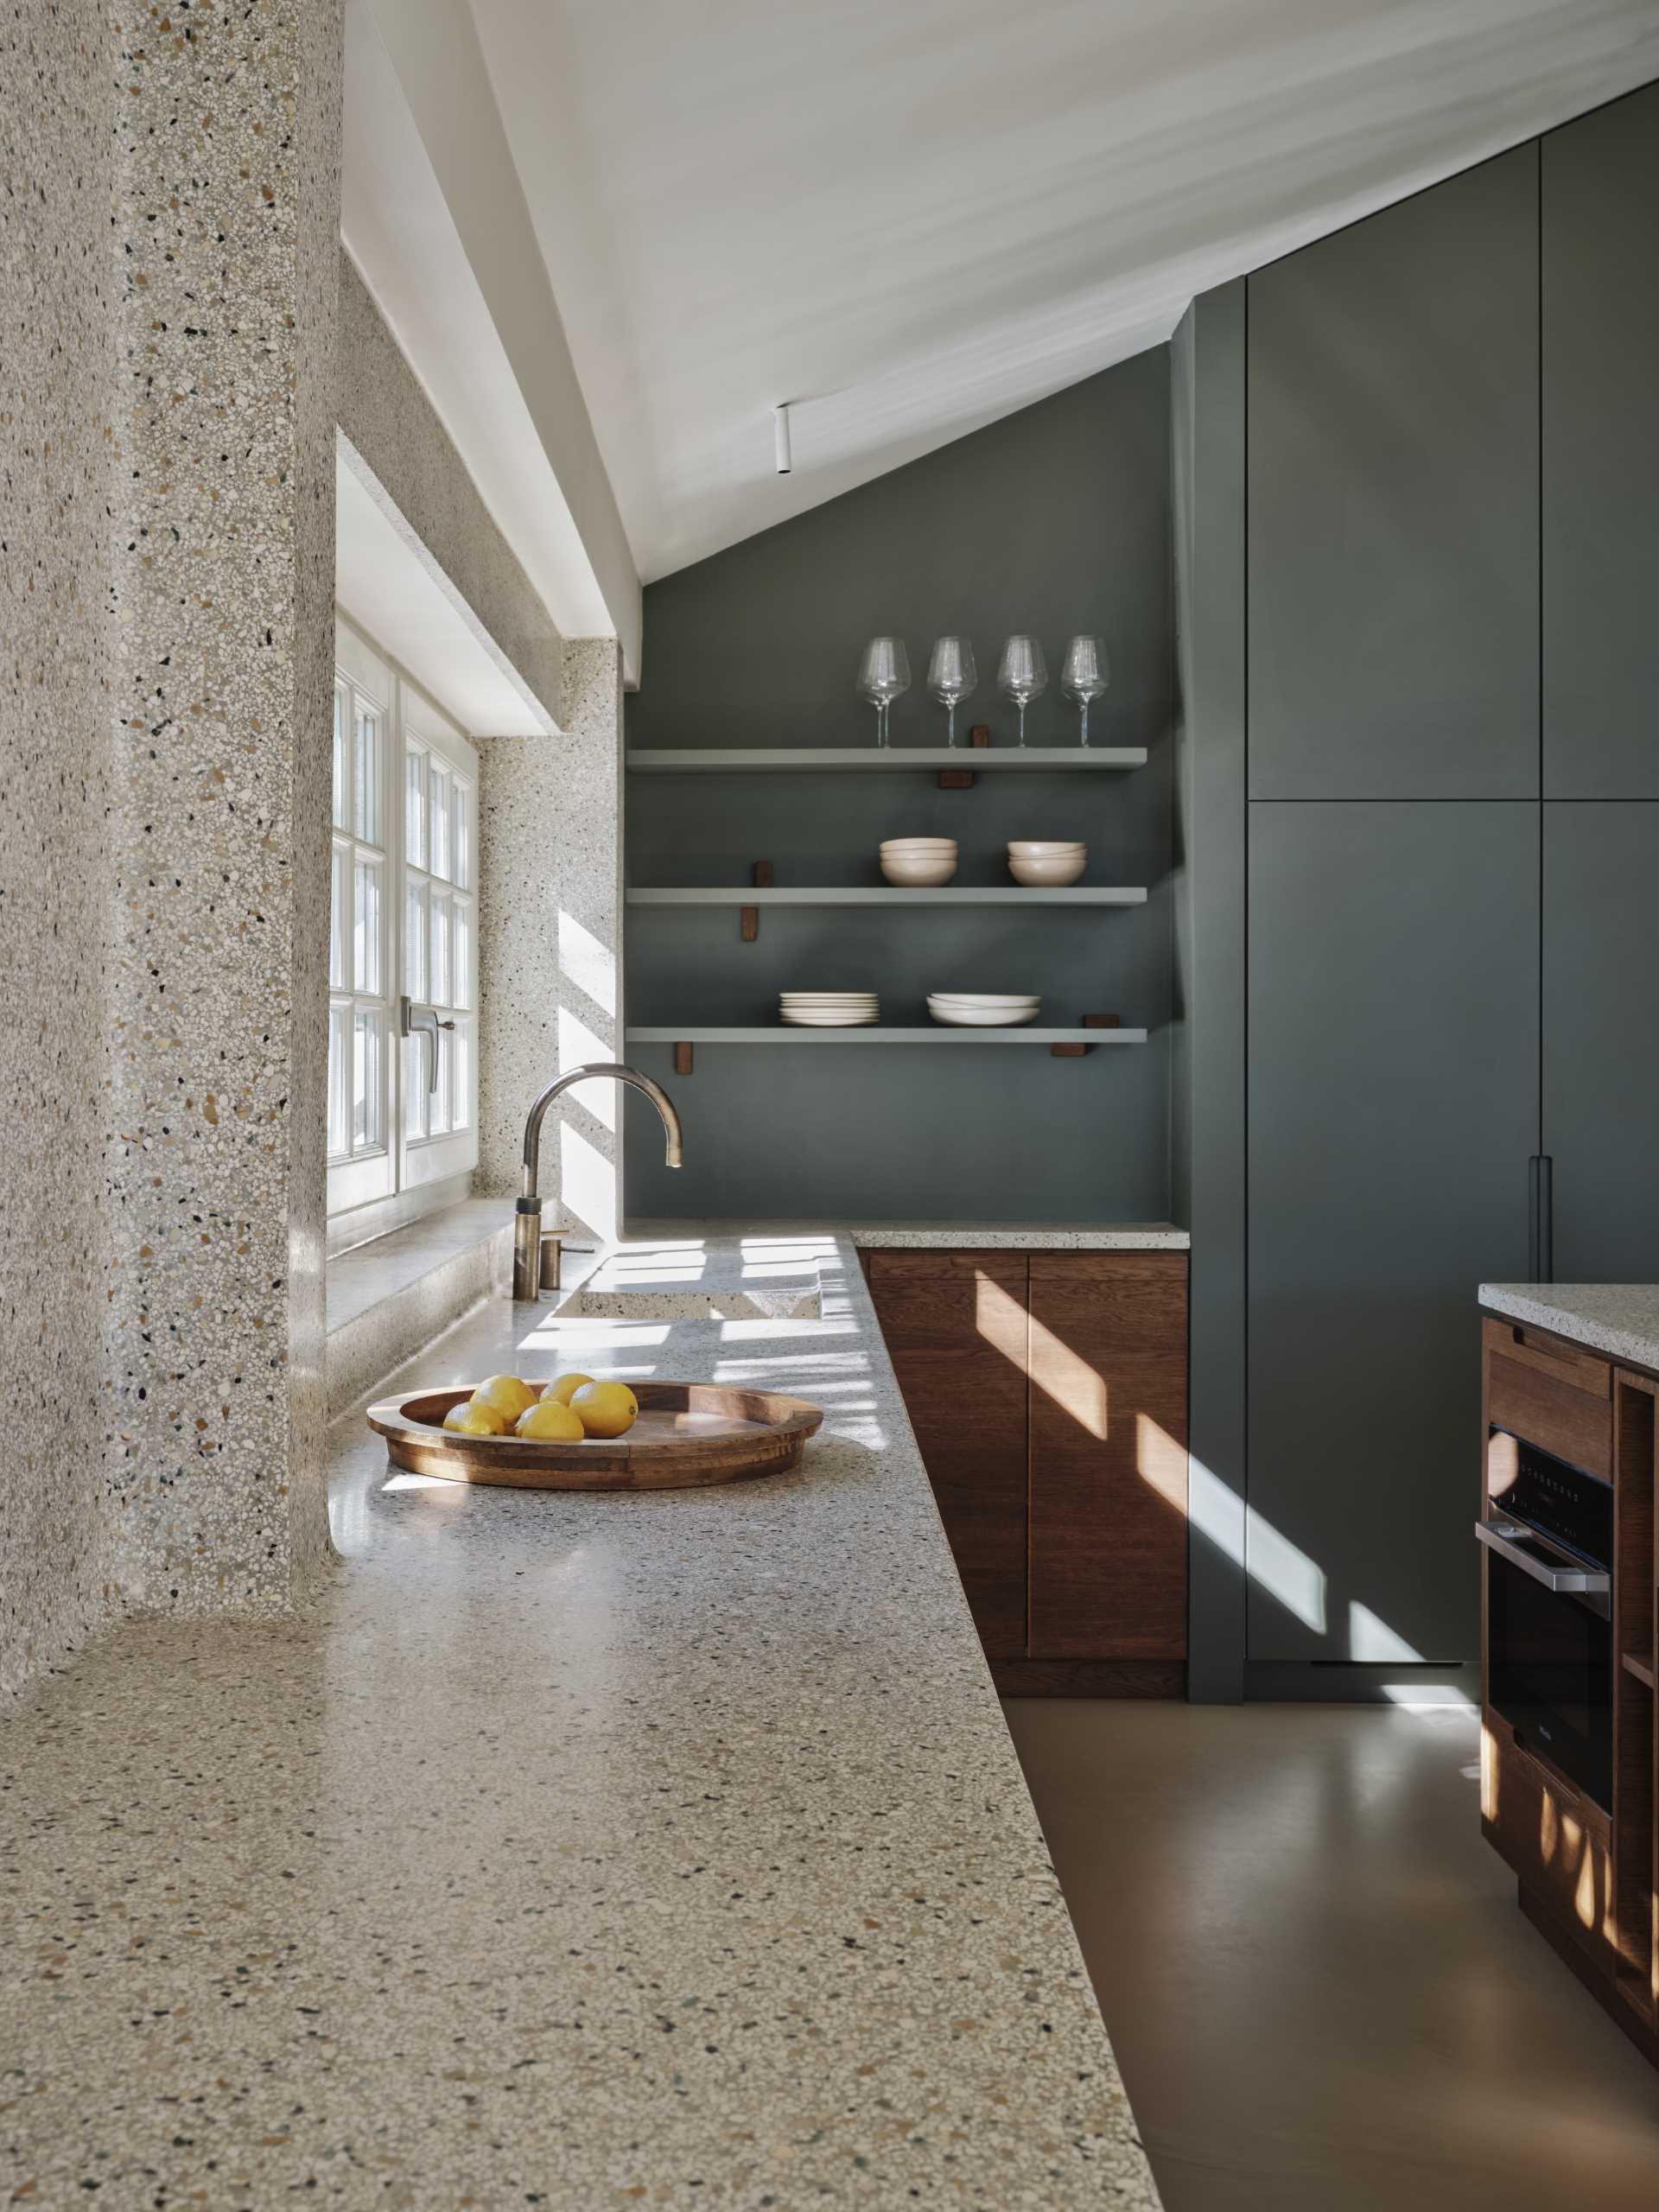 A modern kitchen with dark wood and matte green cabinets, also includes a seamless terrazzo countertop and integrated sink, that then travels up onto the wall.